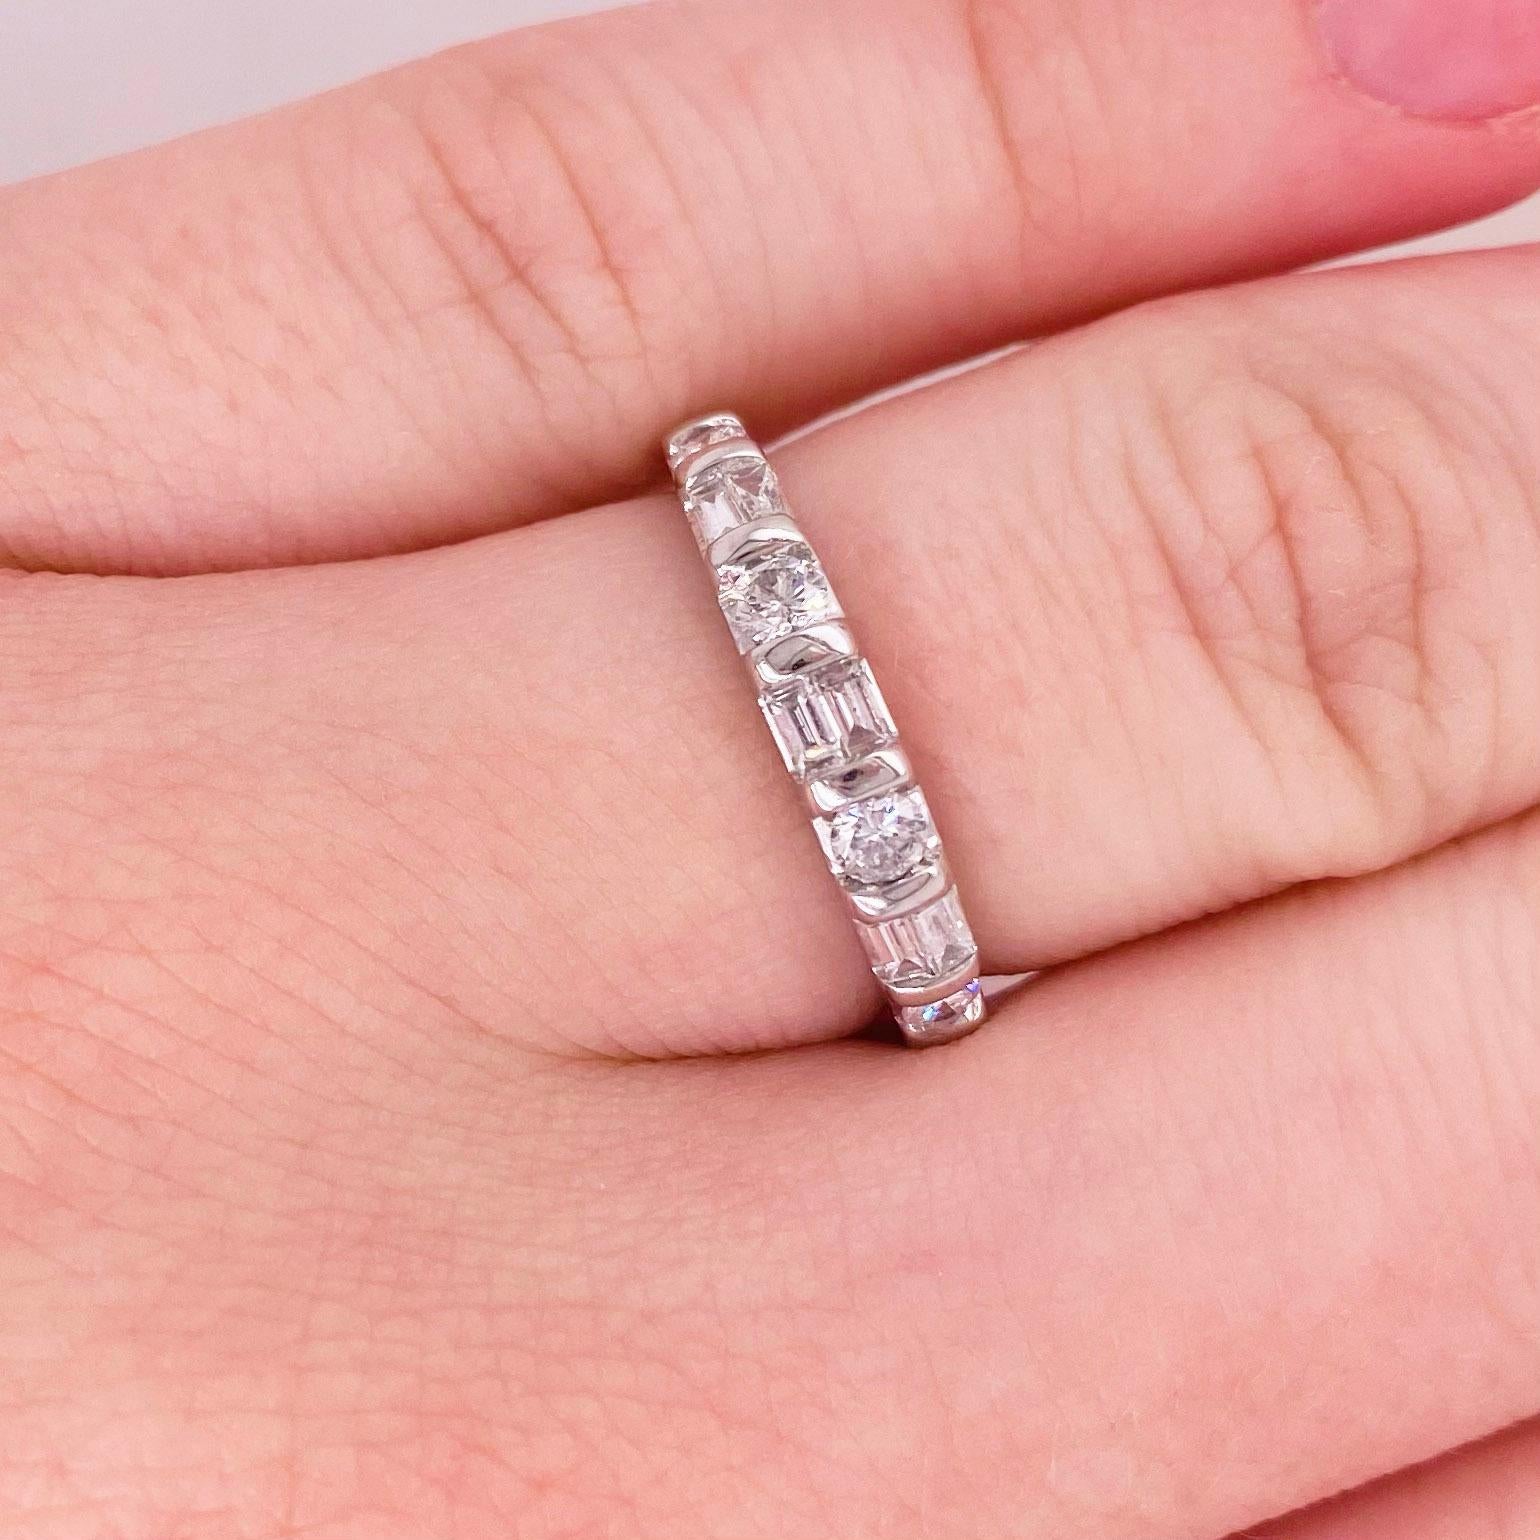 This stunningly beautiful 14 karat white gold band dripping with alternating round and baguette diamonds provides a look that is very classic and modern at the same time! This ring is very fashionable and can add a touch of style to any outfit, yet